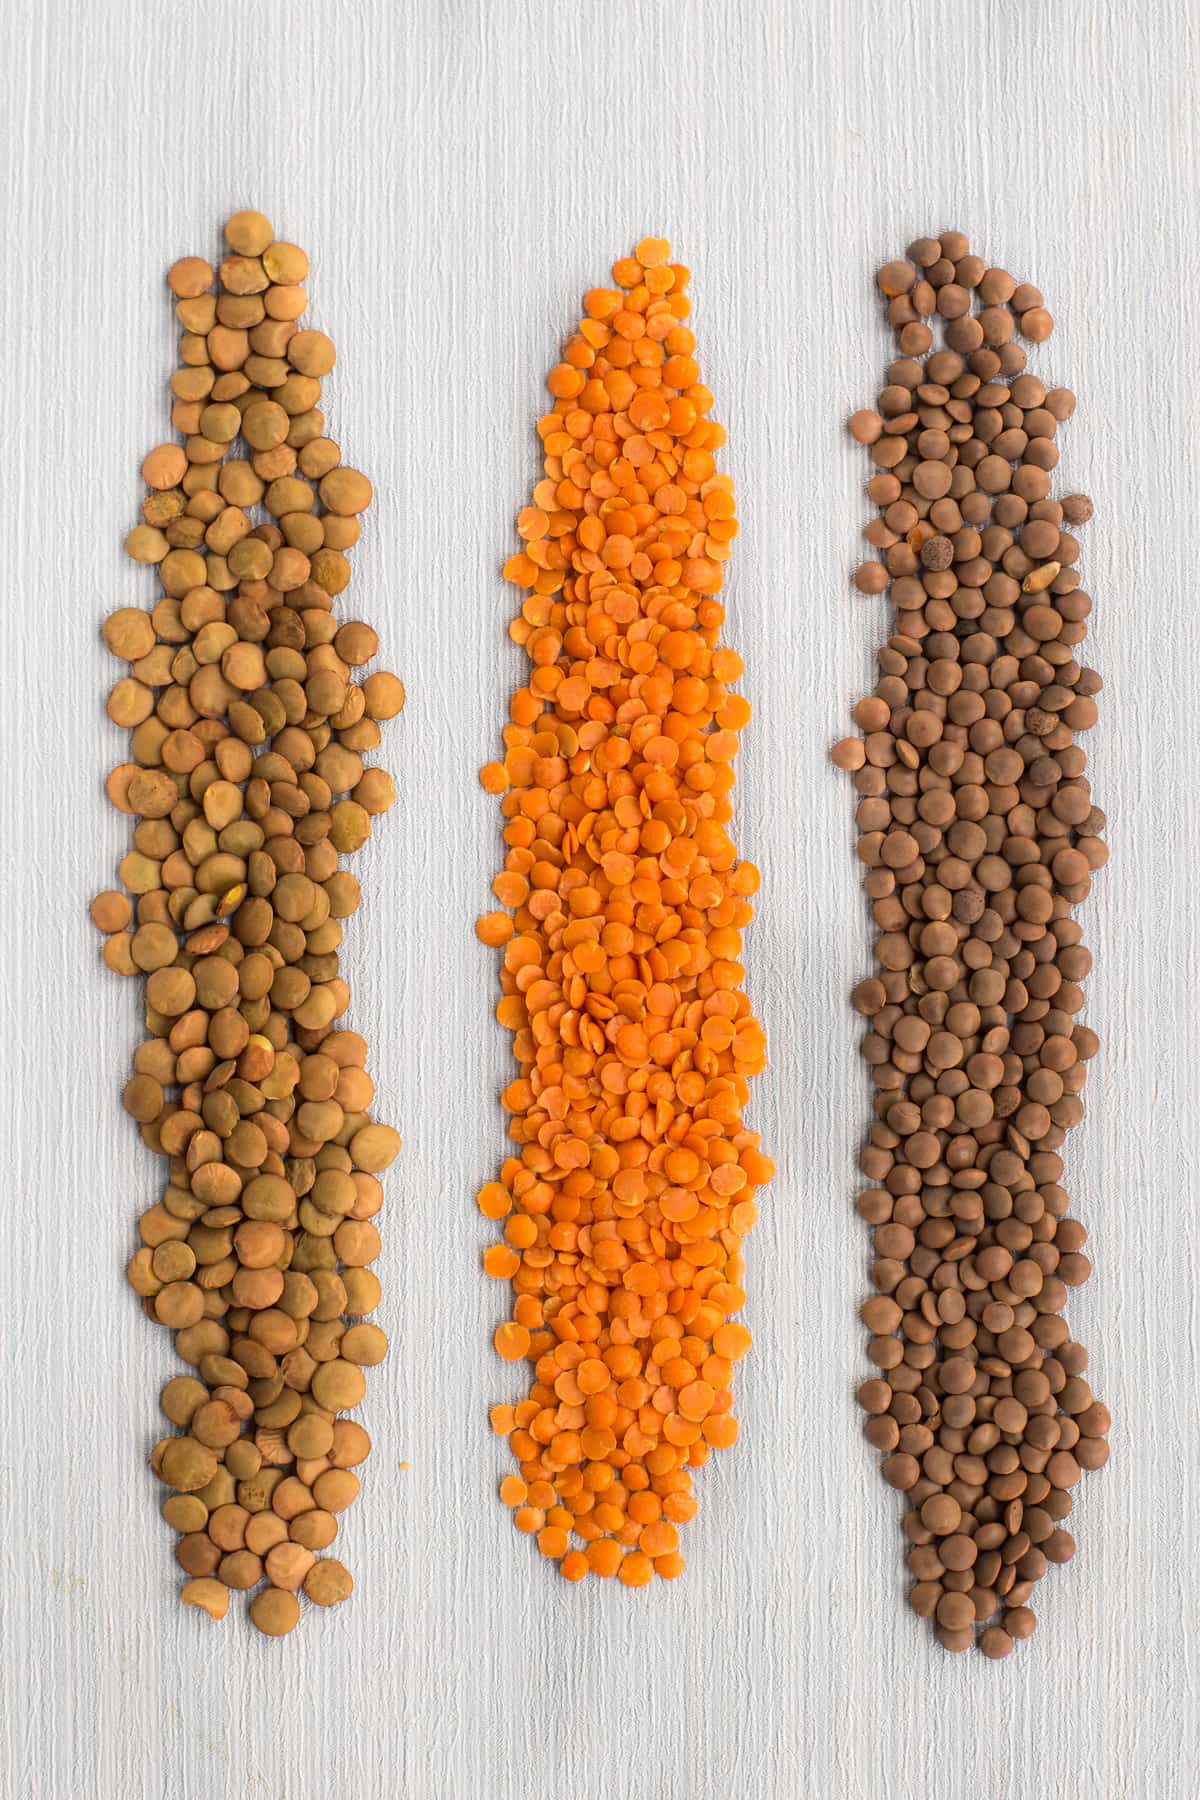 What are the Types of Lentils? (and what are good